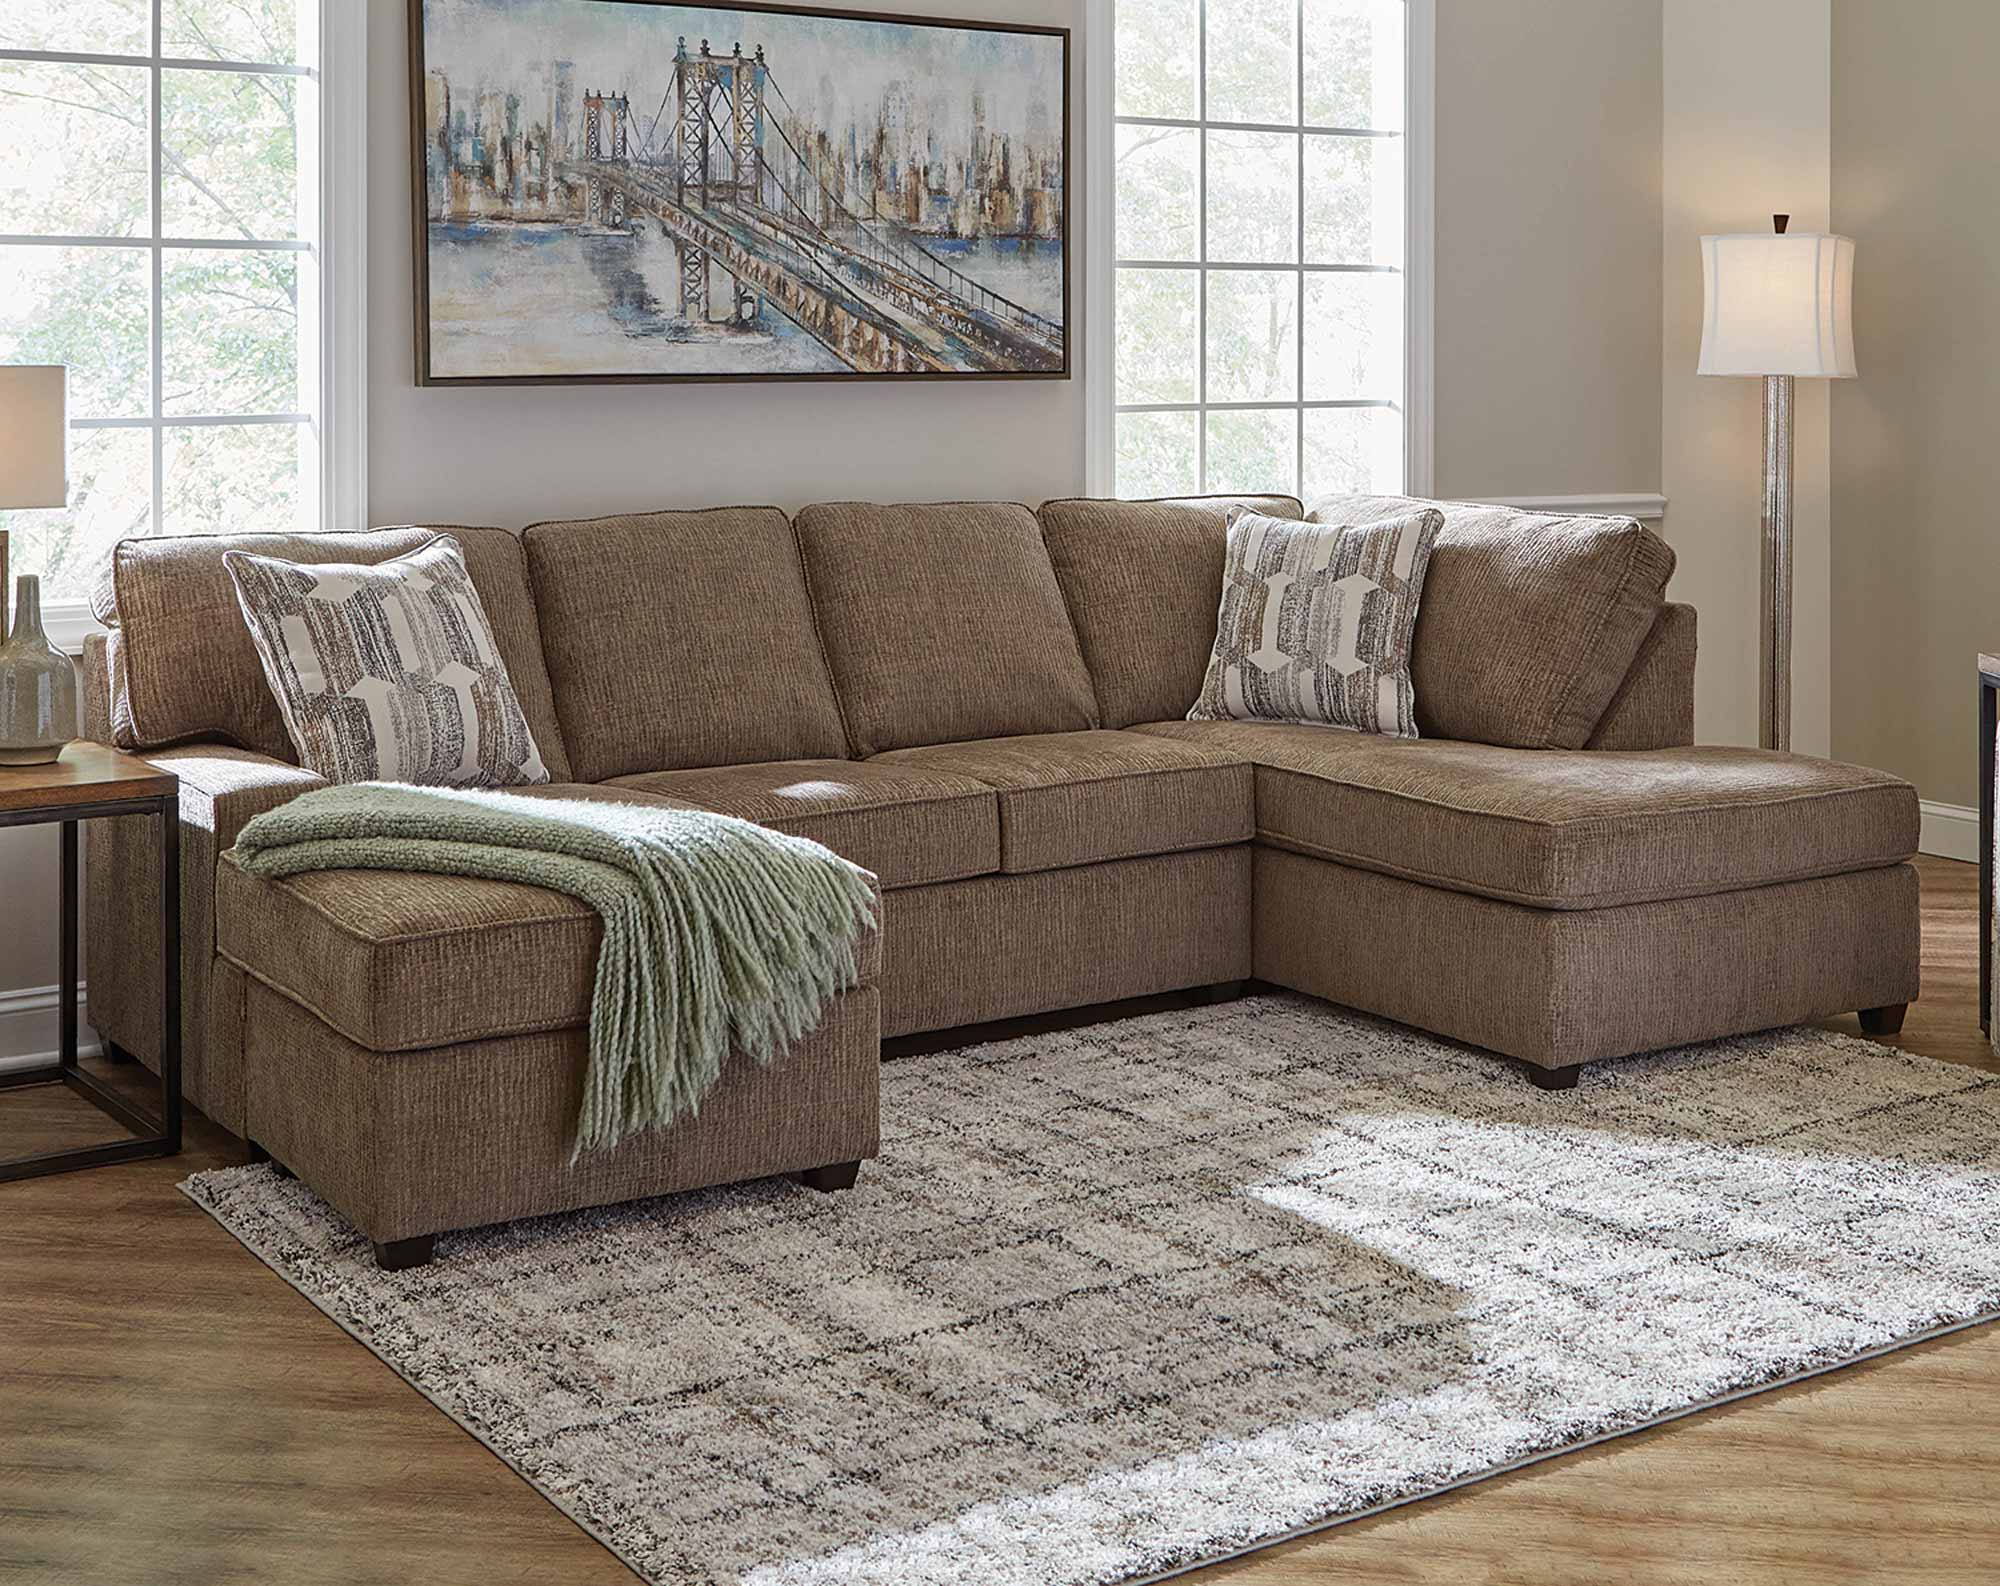 2080 Two Piece Sectional with Chaise in Nutmeg $1295.99